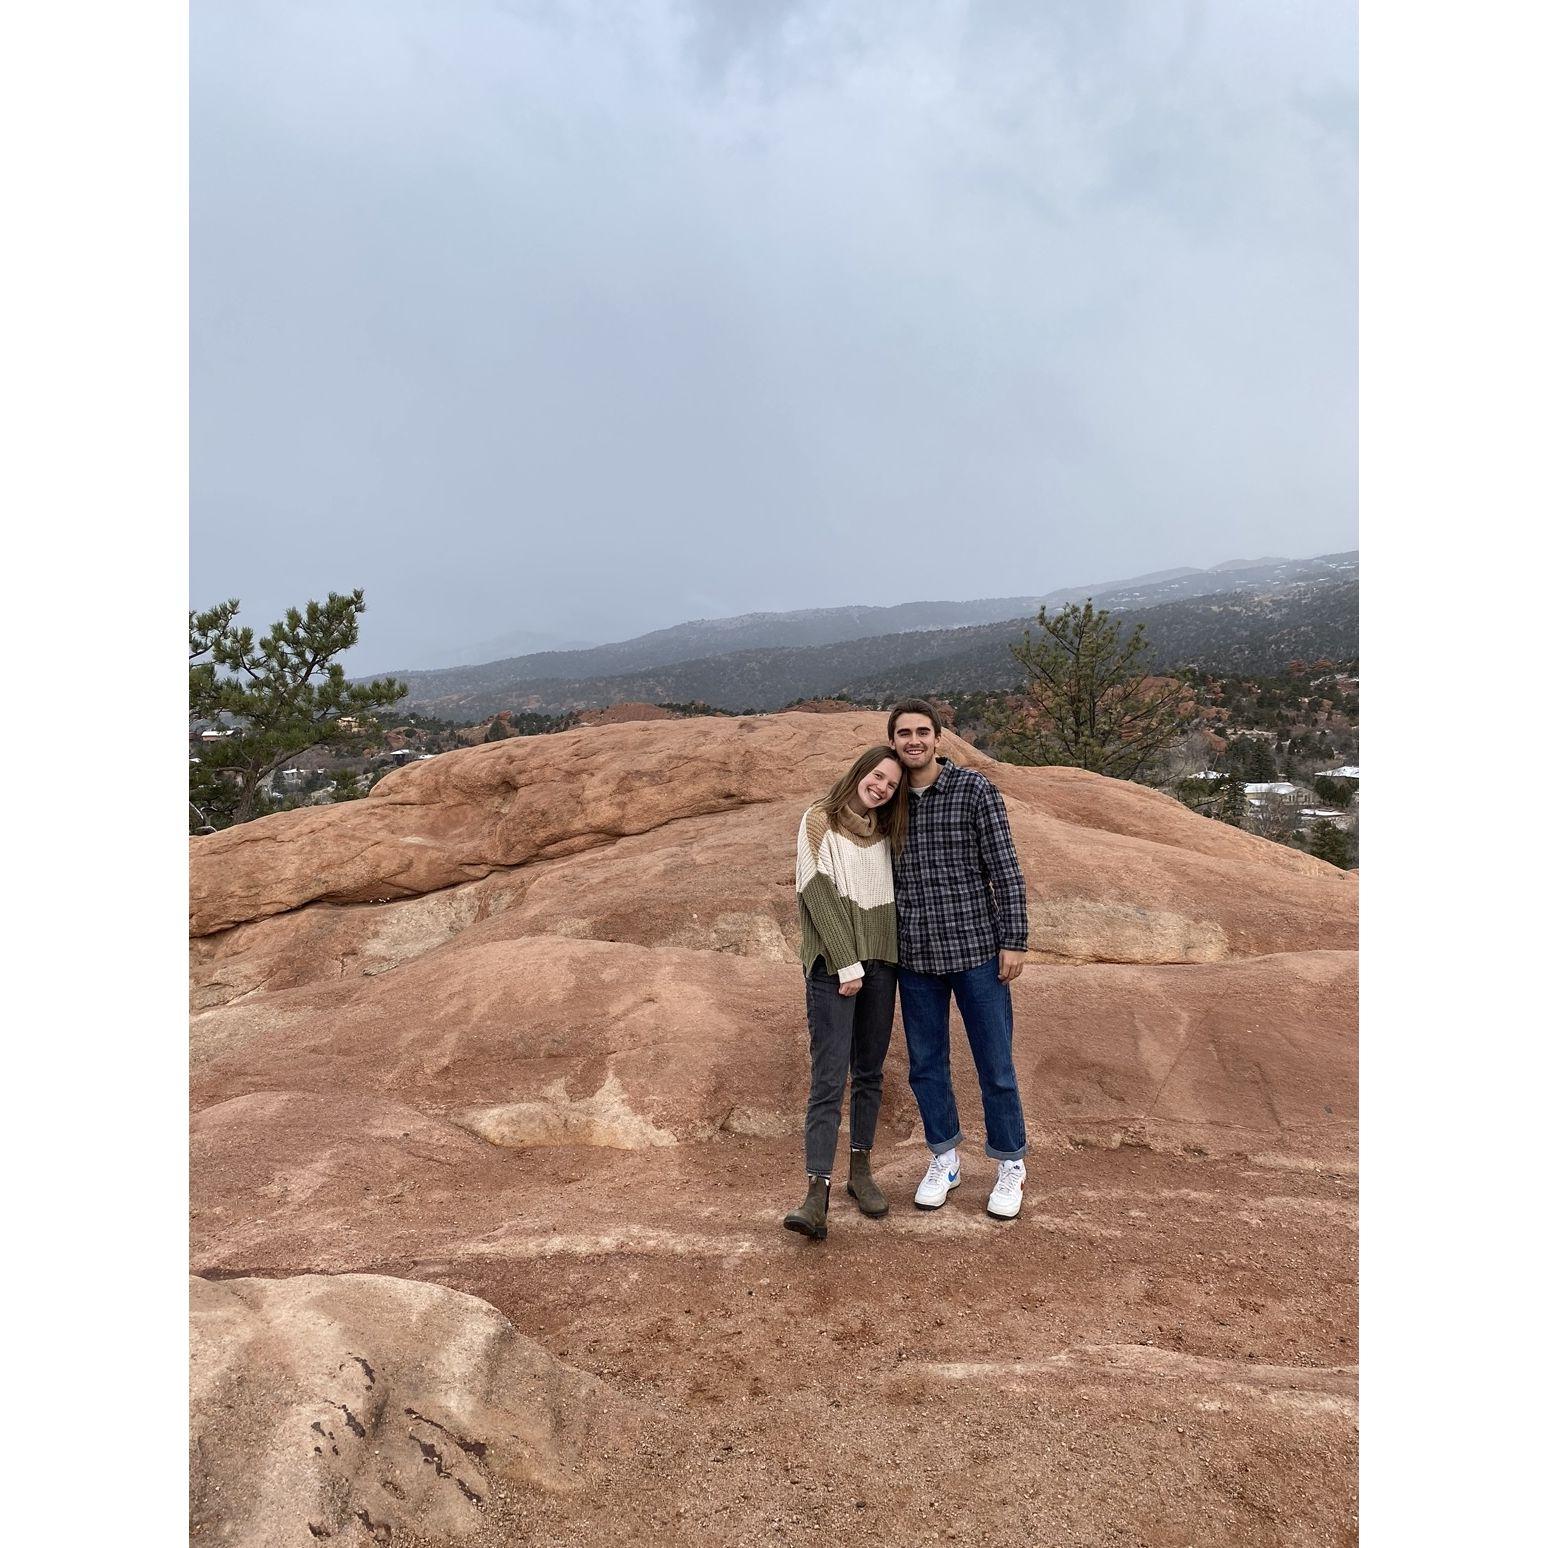 Our first date in Colorado Springs! We accidentally watched a wedding at the top of Garden of the Gods!
November 24, 2021.